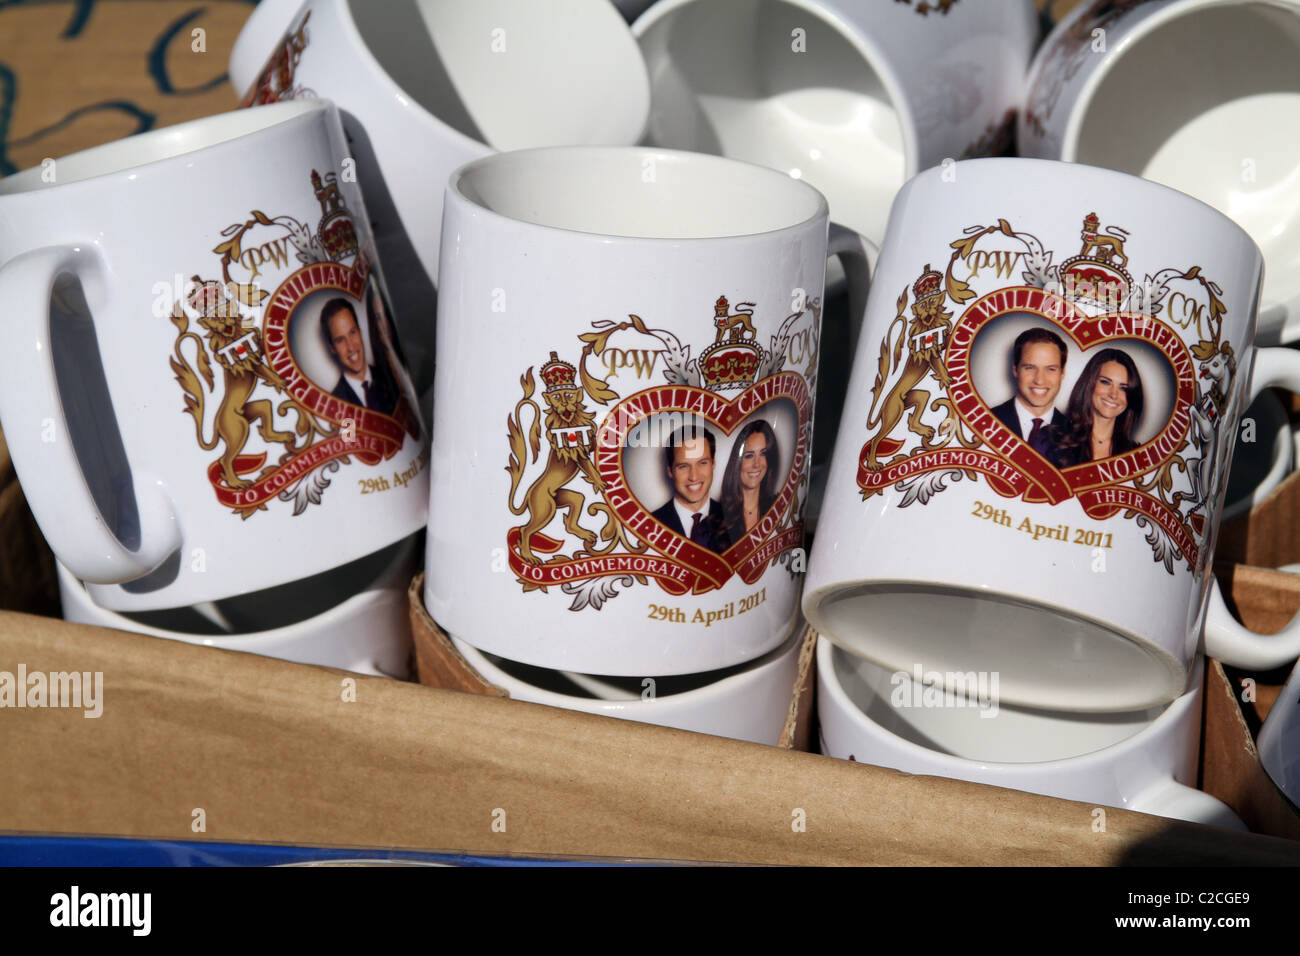 UK. PRINCE WILLIAM AND KATE MIDDLETON ROYAL WEDDING SOUVENIRS FOR SALE IN A STALL IN LONDON Stock Photo